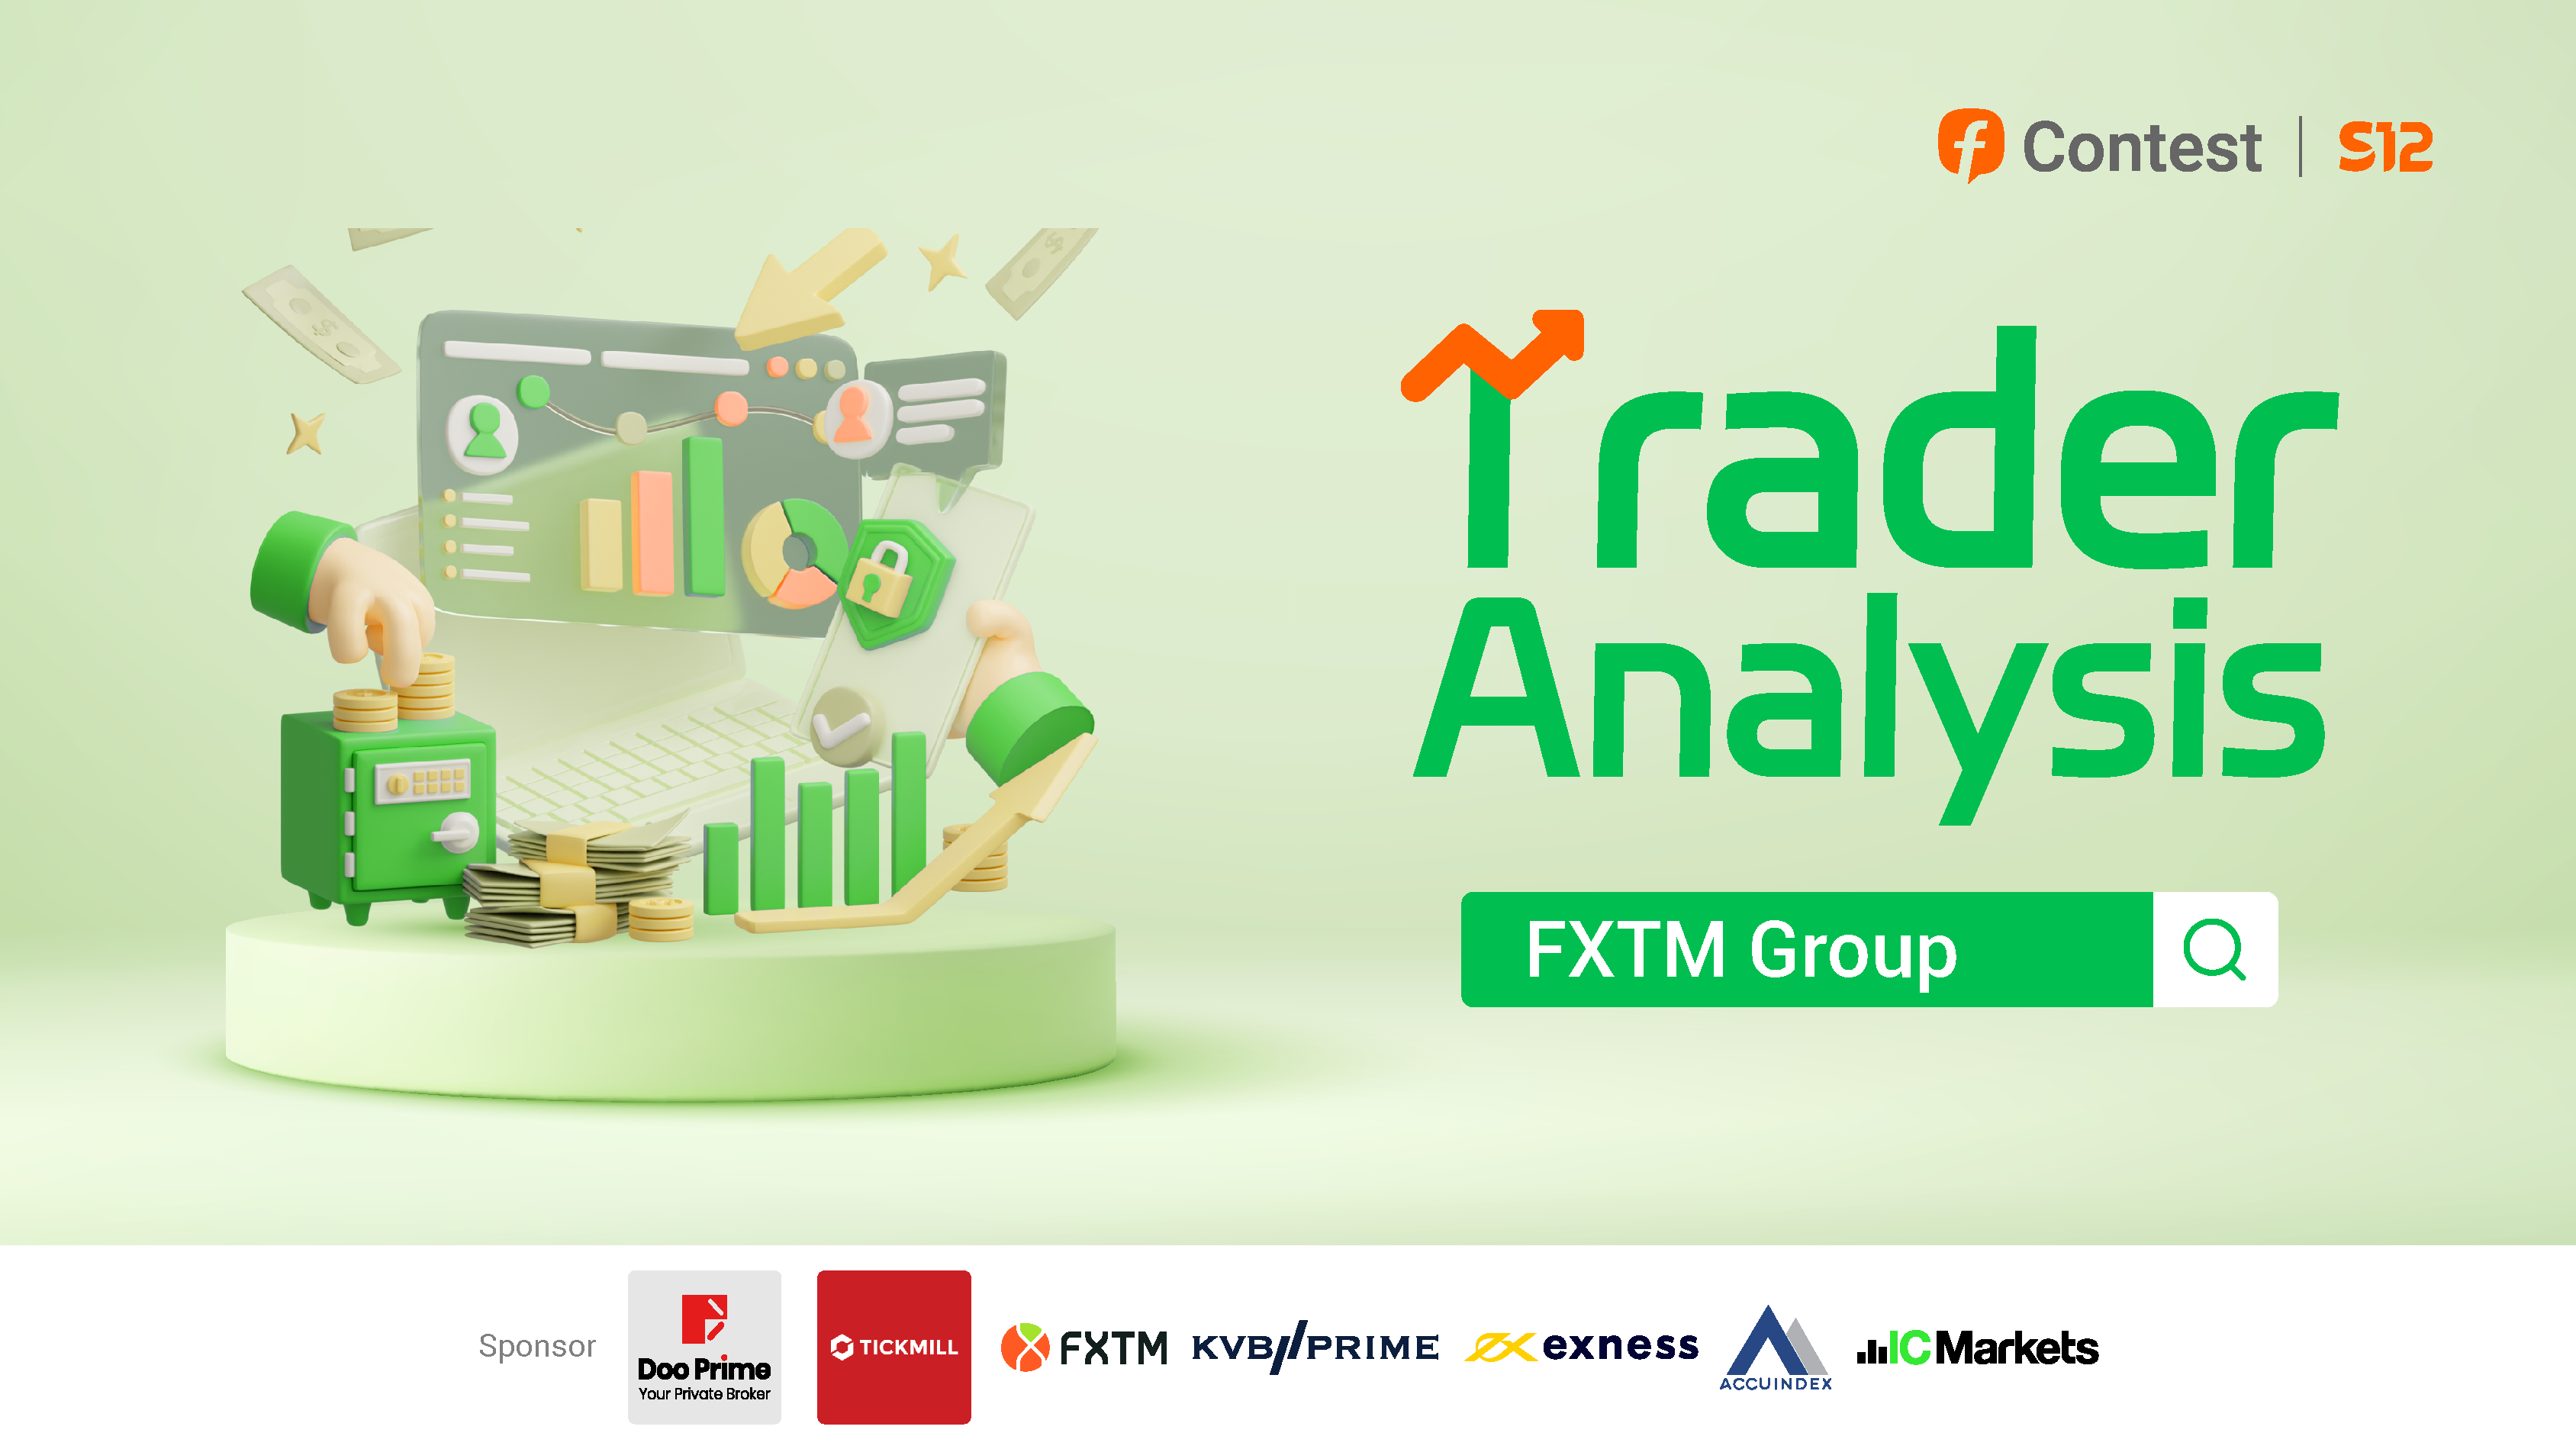 The winning rate of FXTM Group is 5% higher than the average of S12！